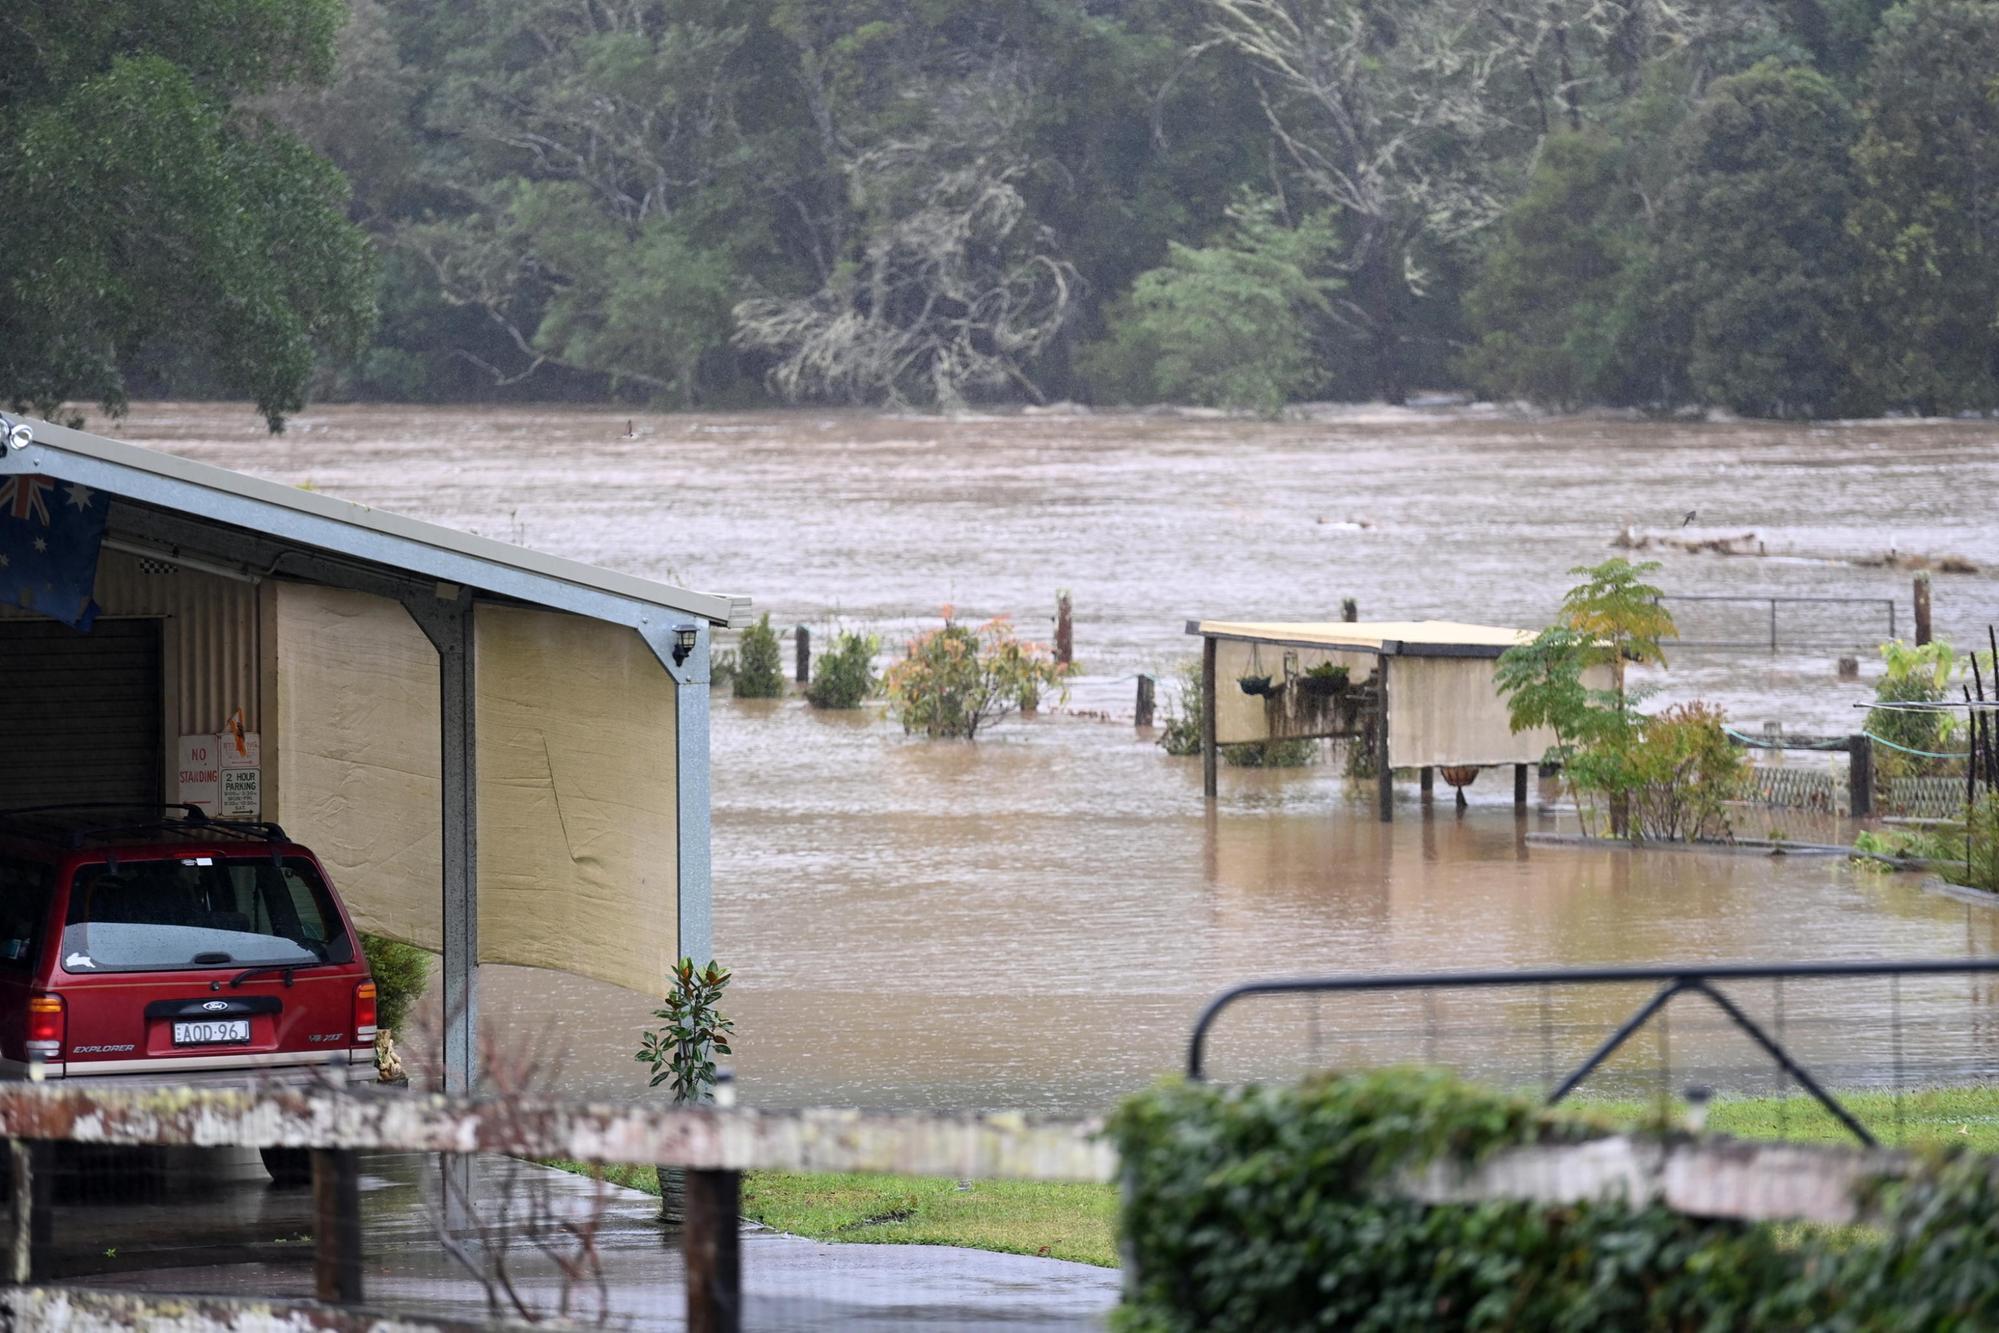 Torrential rains and floods in Sydney evacuated 50,000 people